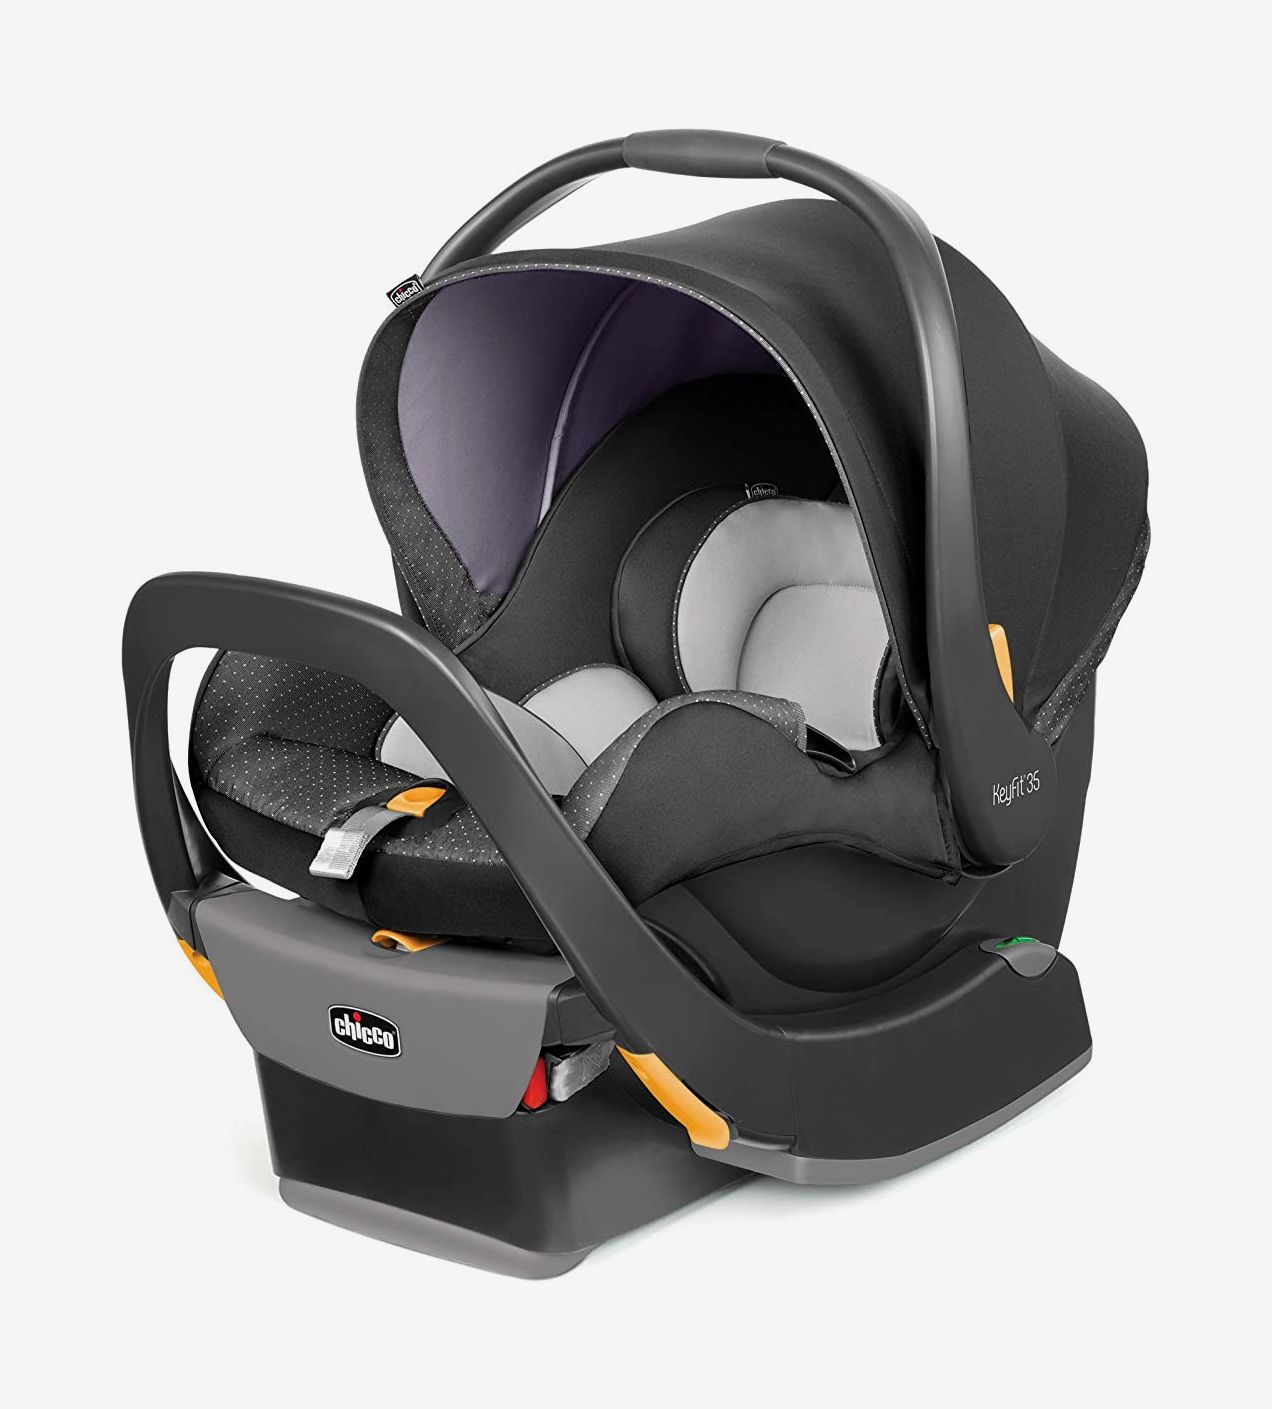 25 Best Infant Car Seats And Booster 2020 The Strategist - Top Infant Car Seats 2020